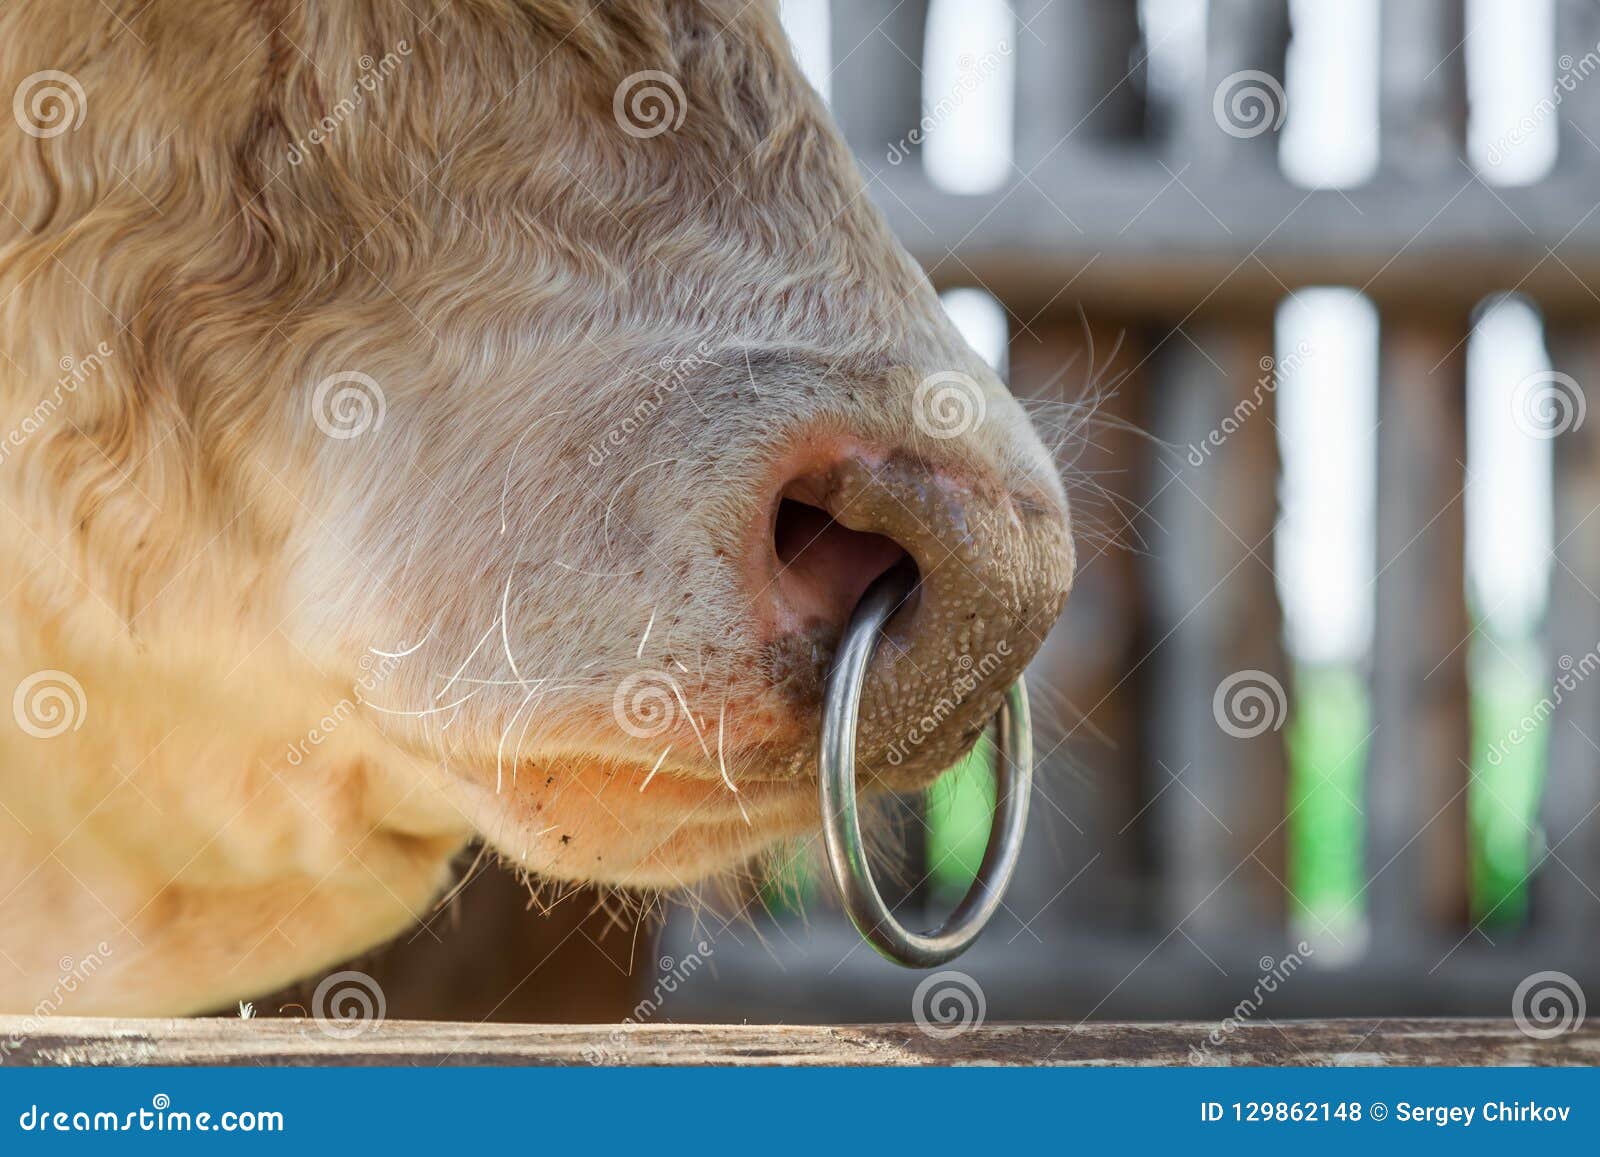 Big Bull With A Ring In A Nose Stock Photo Image of bull, farming 129862148